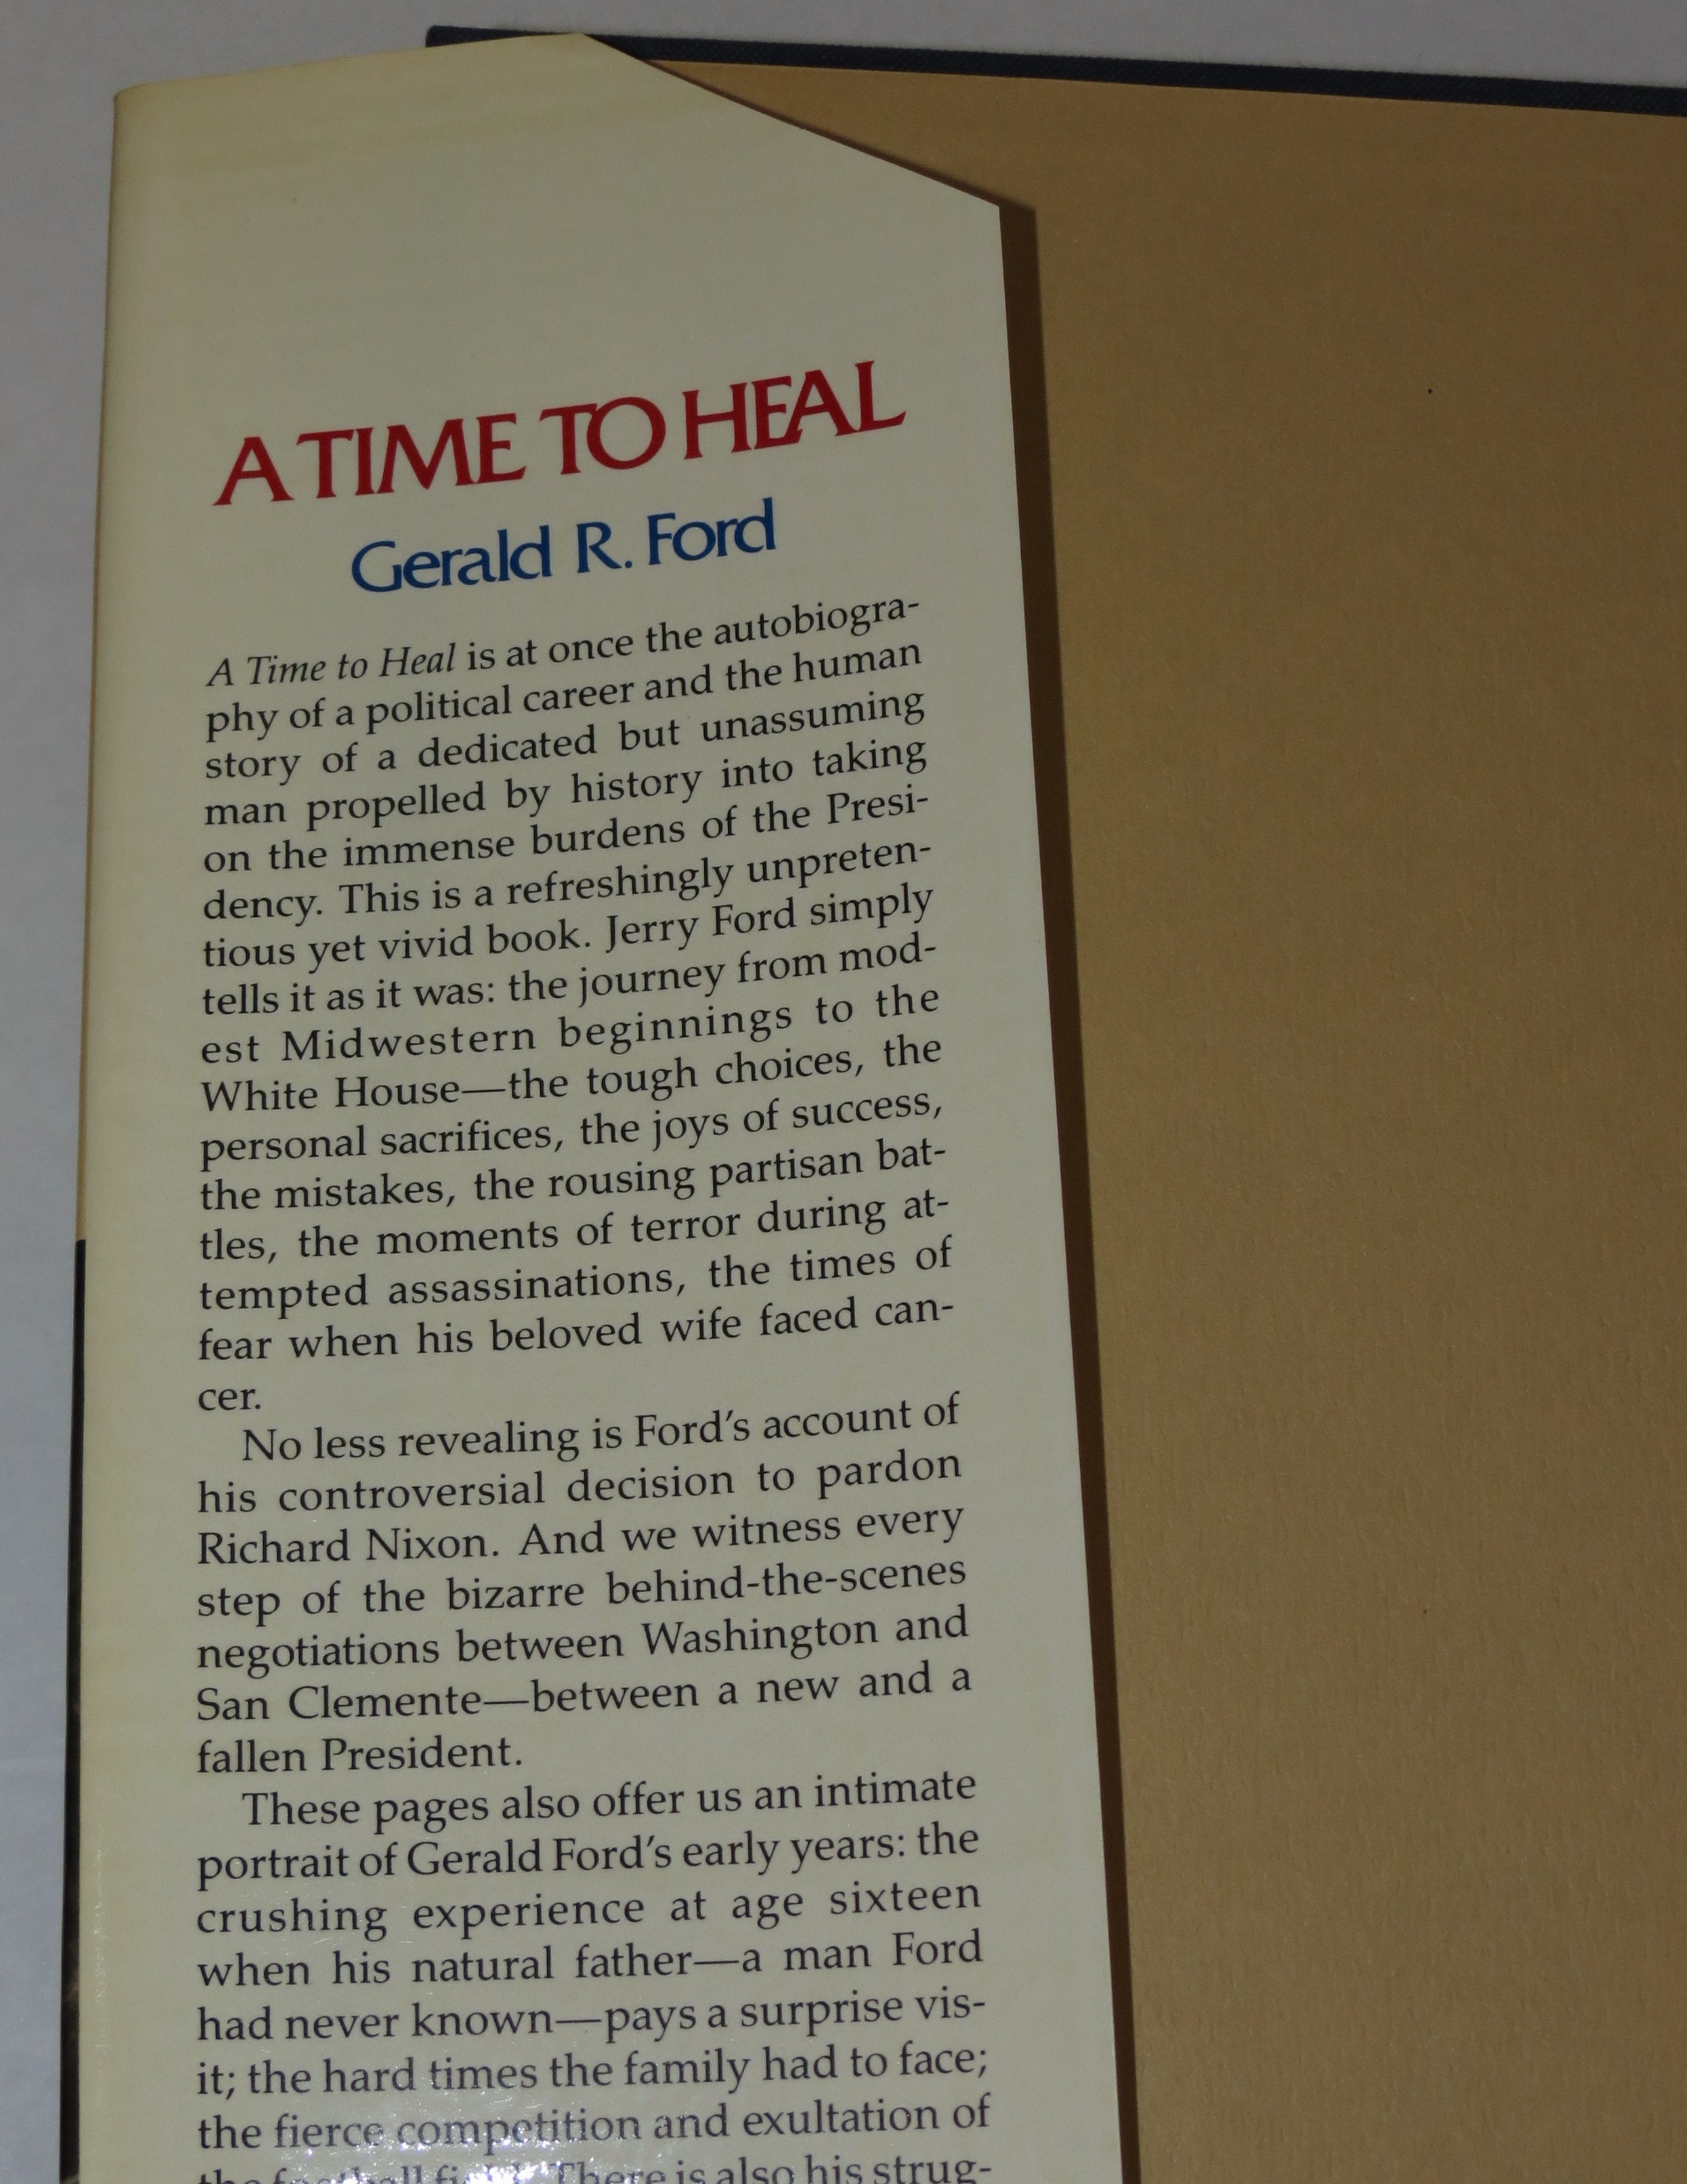 A time to heal the autobiography of gerald r. ford #8